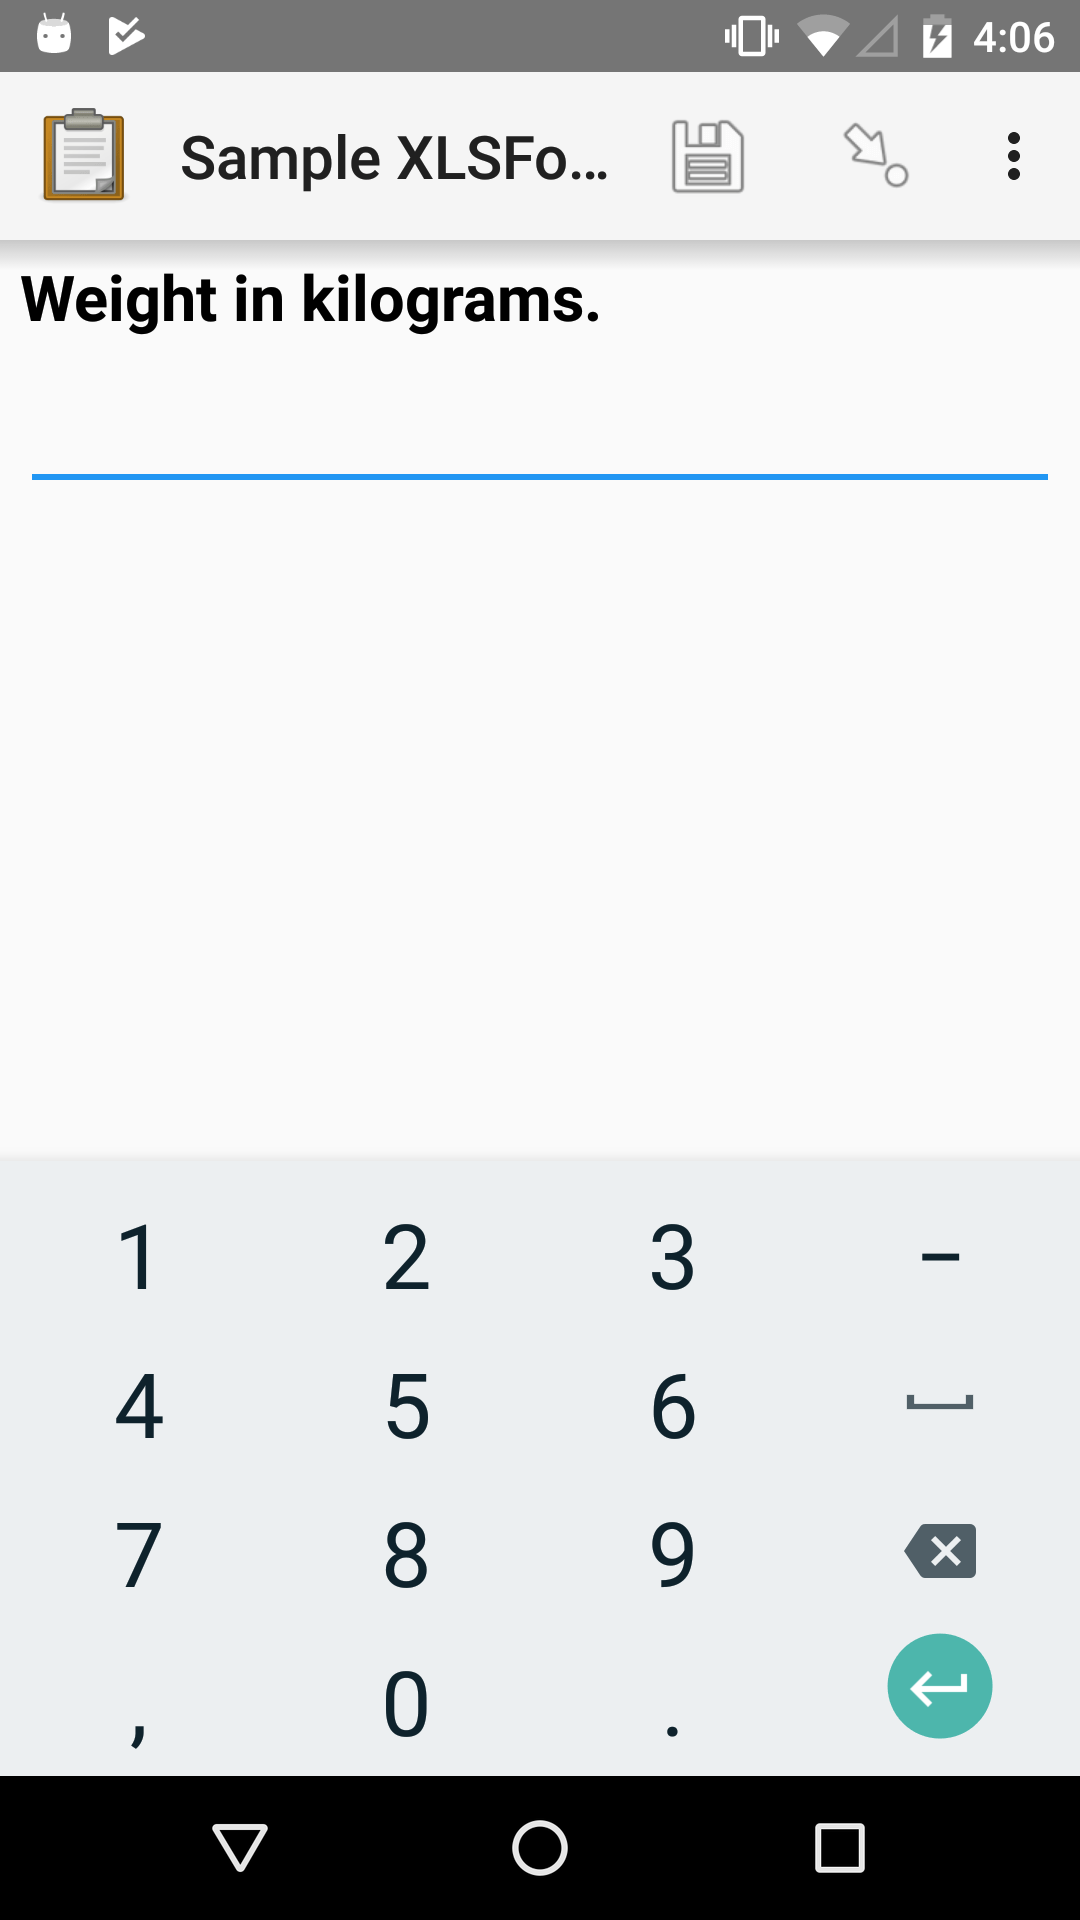 An integer form widget displayed in ODK Collect on an Android phone. The question is "Weight in kilograms." A numerical keyboard is displayed.